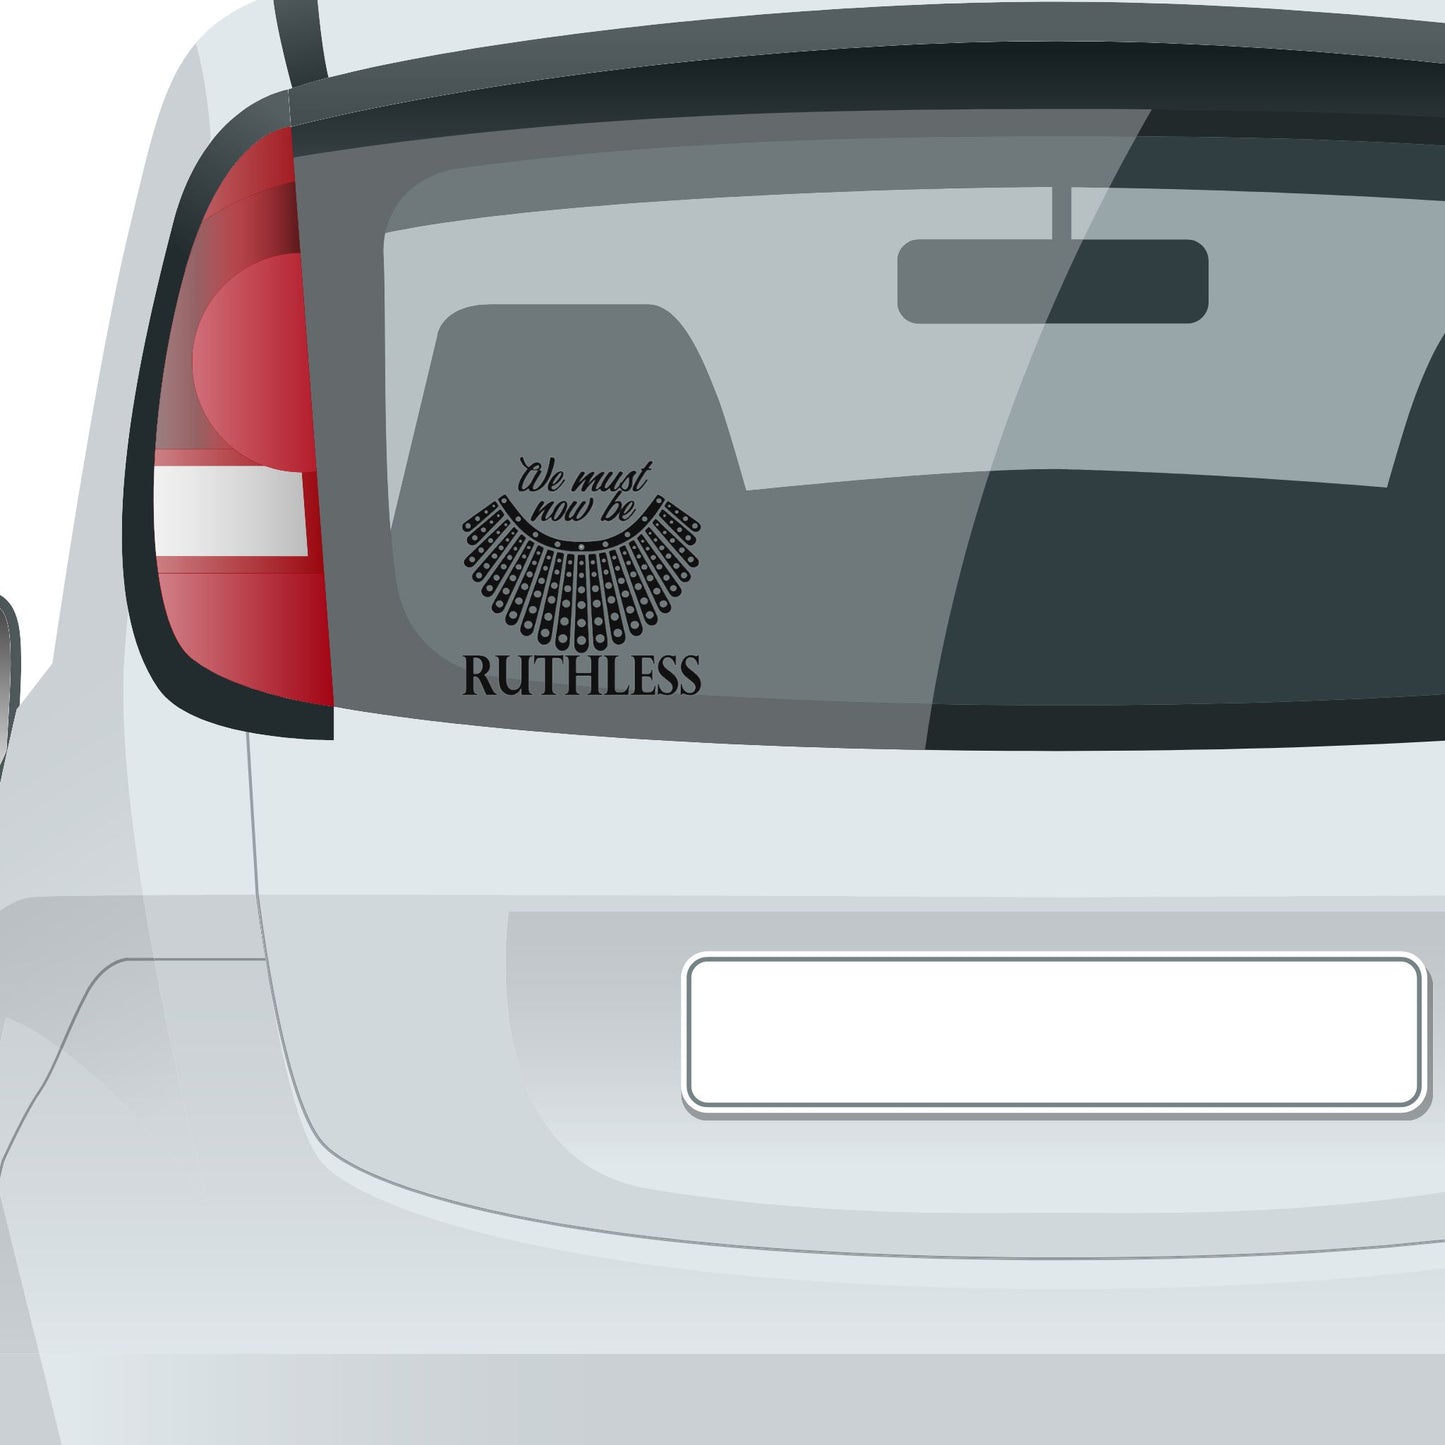 Now we must be Ruthless decal